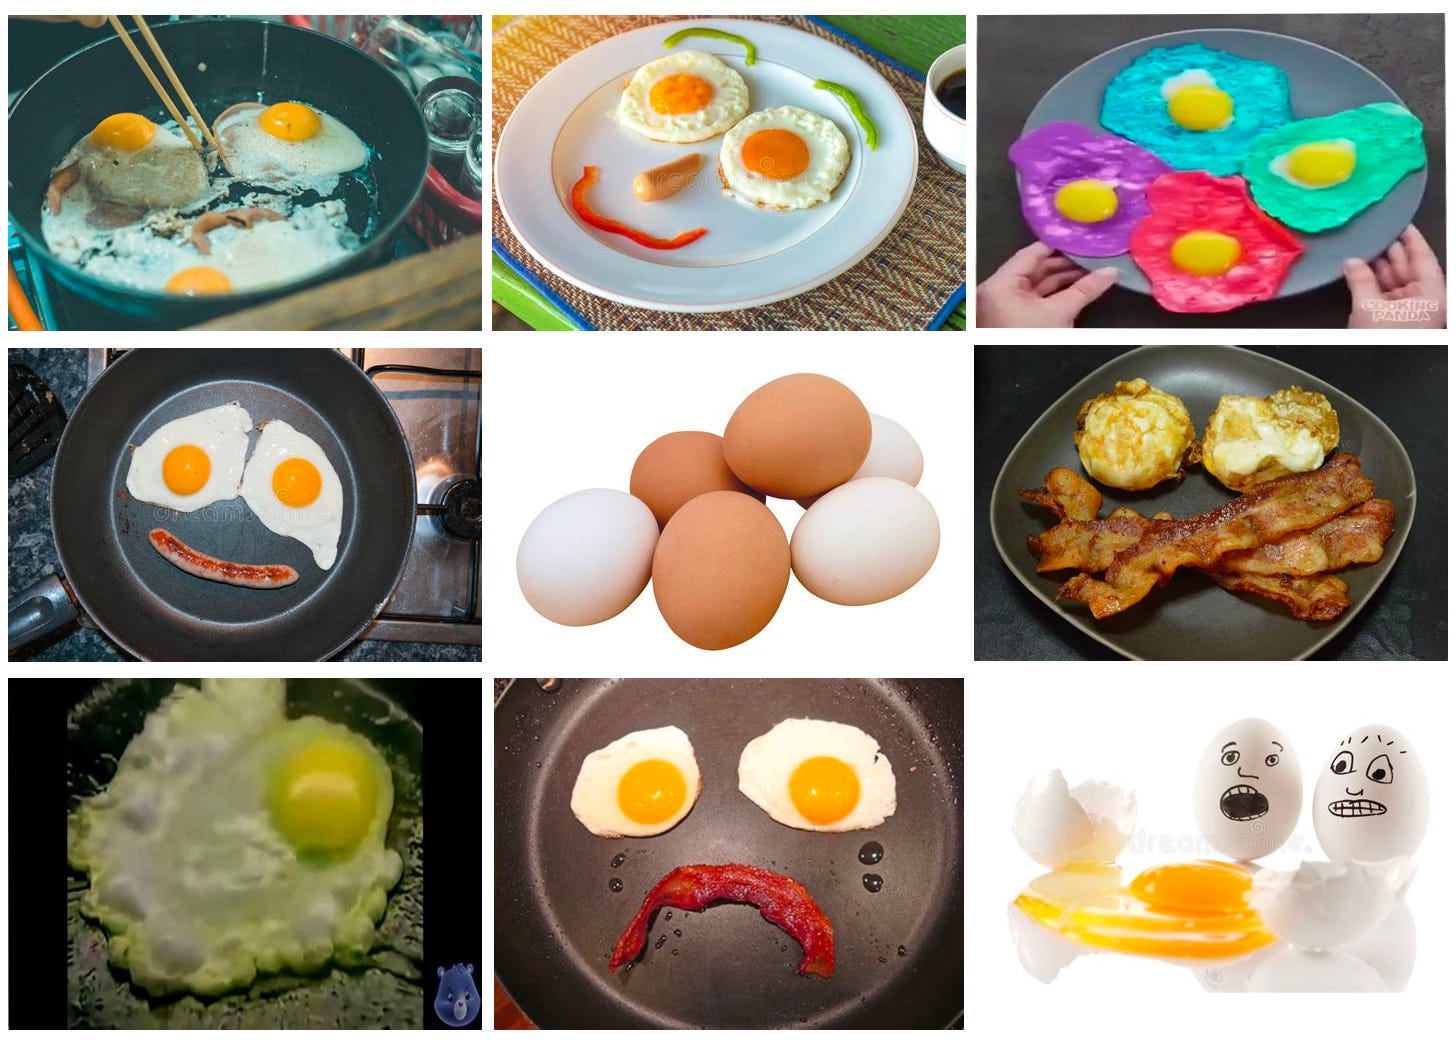 Collage of fried eggs looking happy, sad, colorful, chaotic, etc.